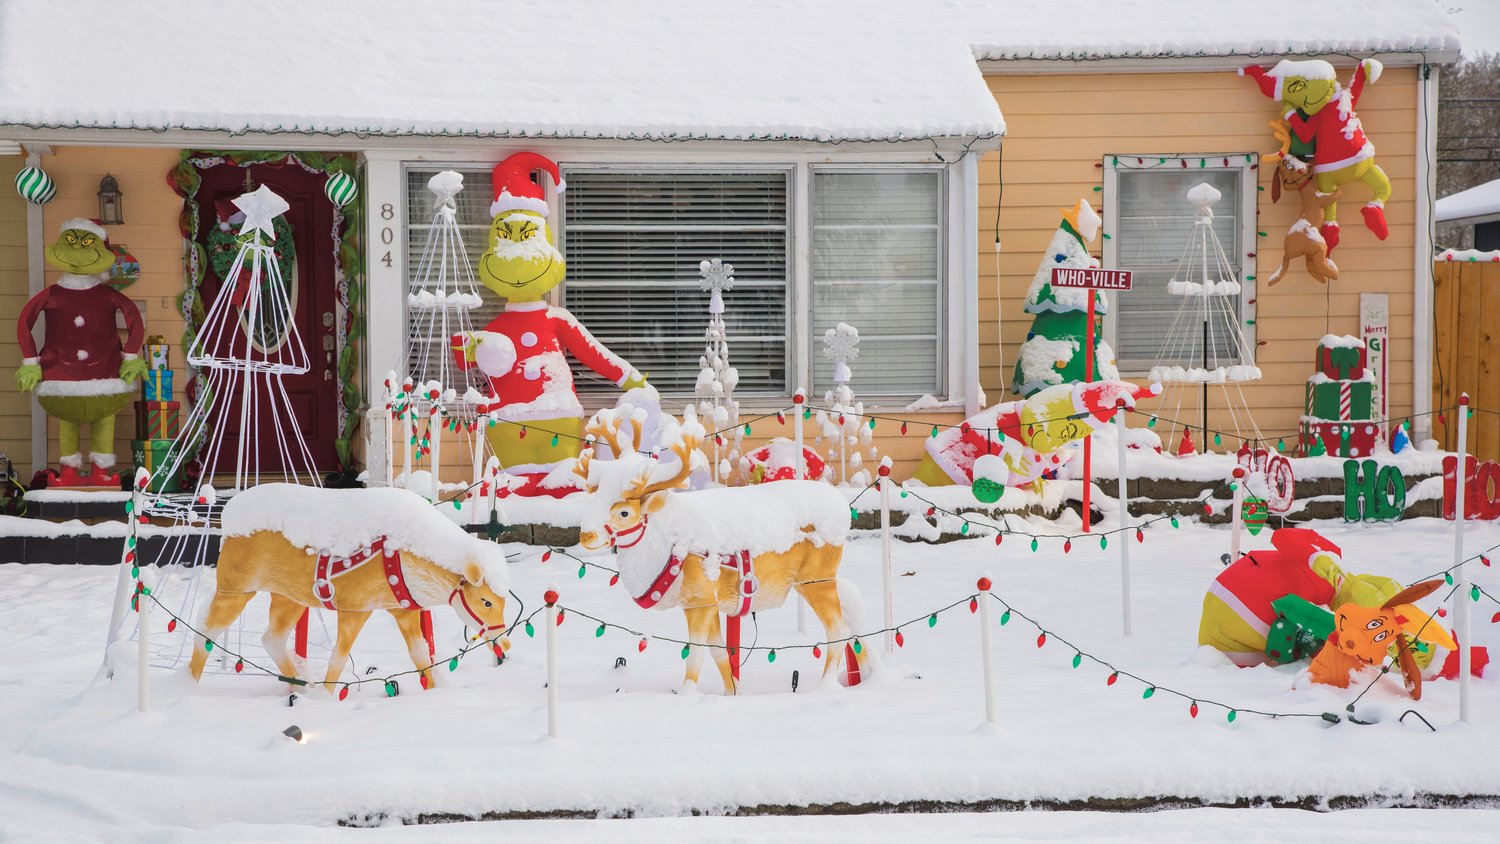 Snow blankets Christmas decor in the 800 block of North Pearl Street in Centralia.